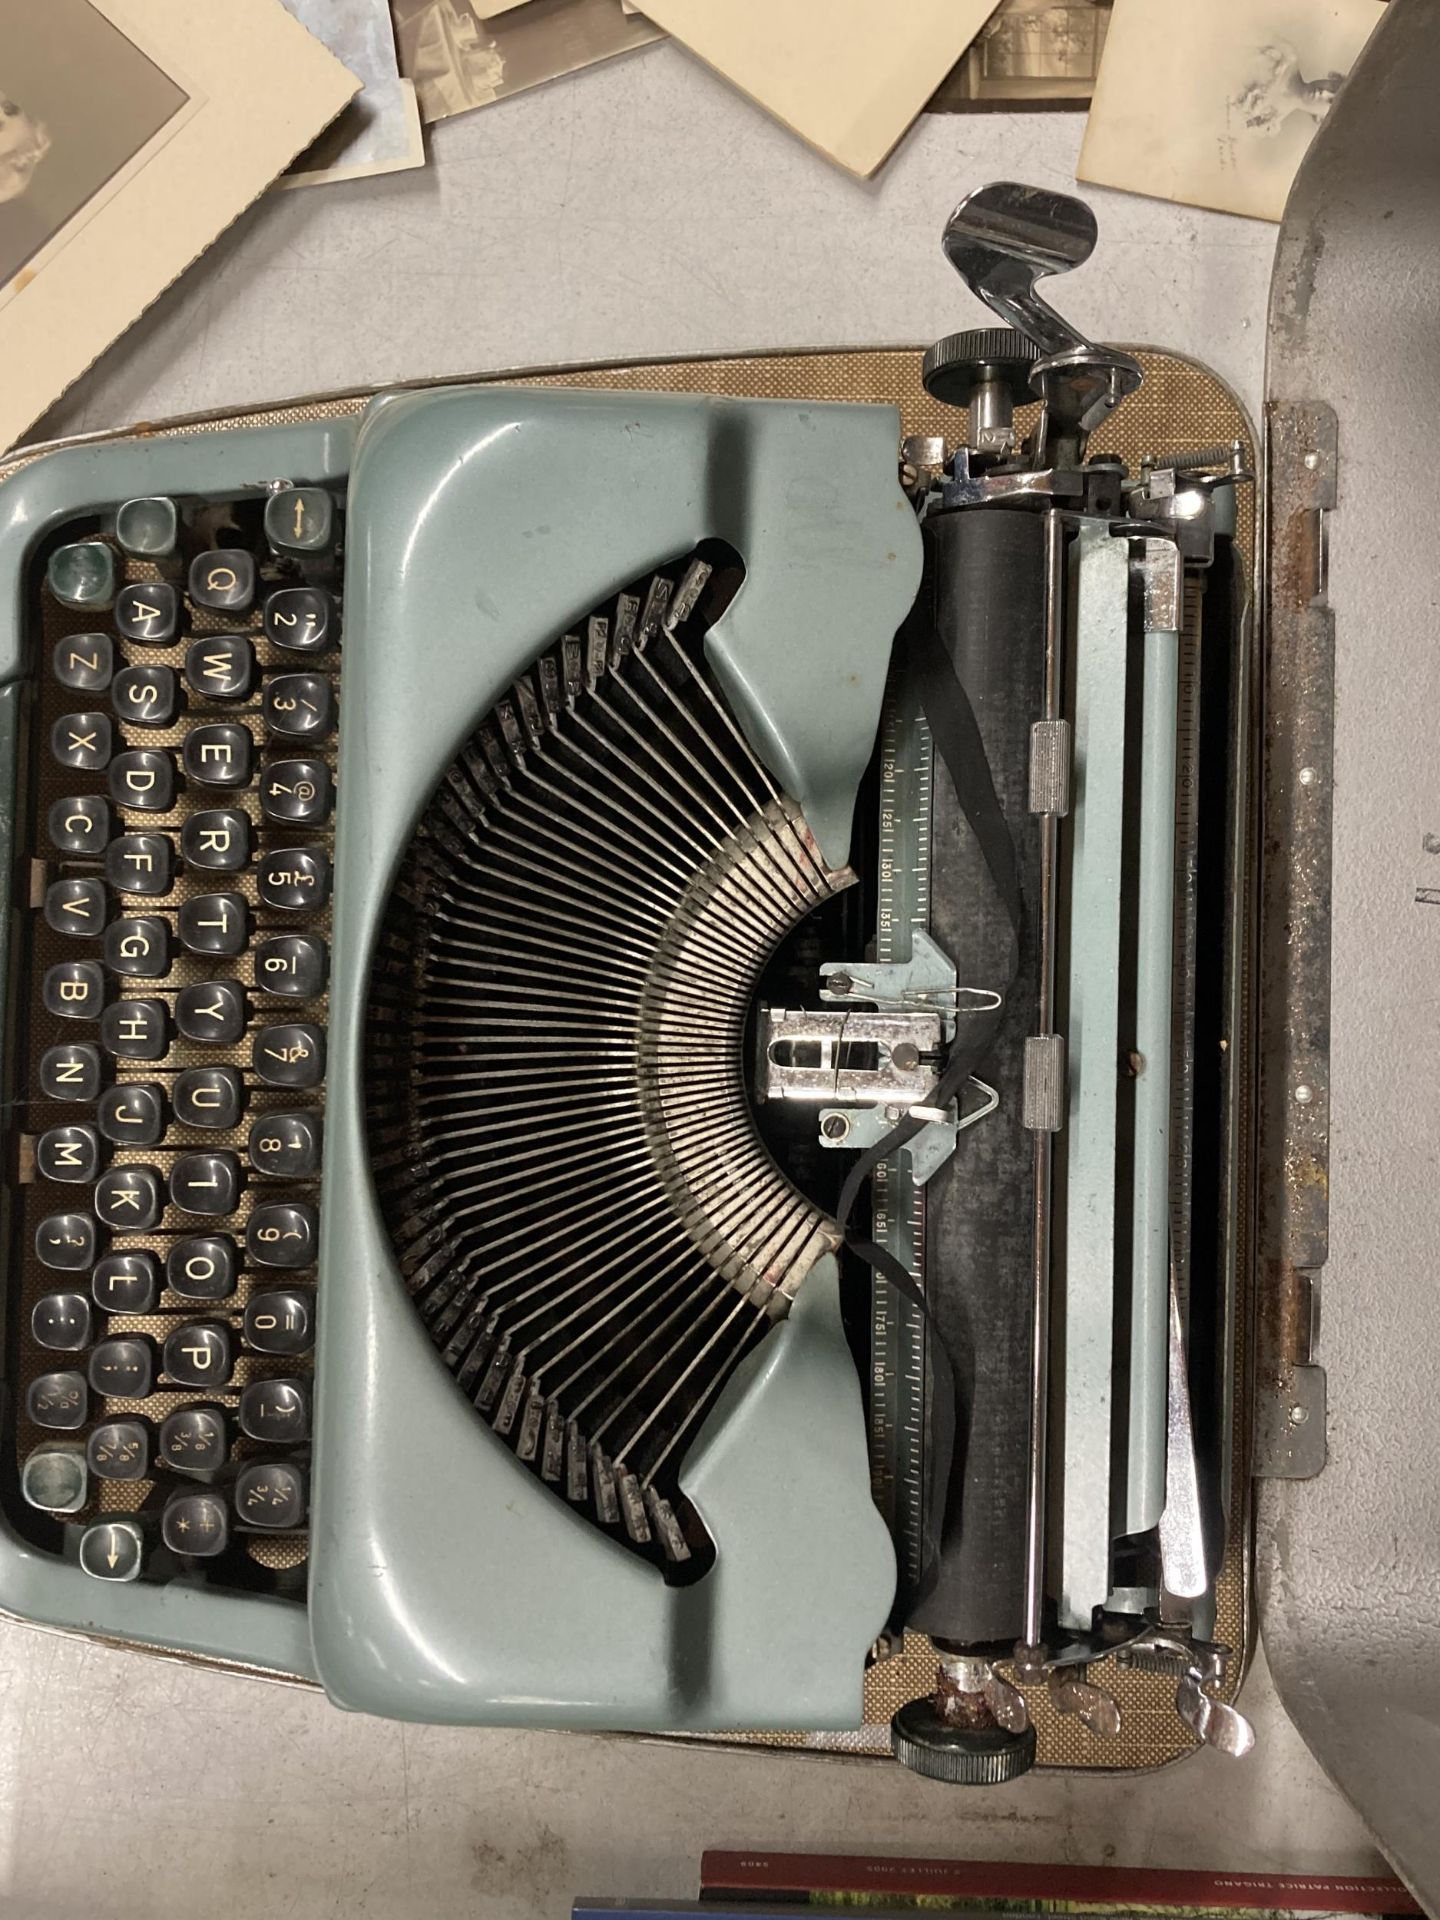 A VINTAGE IMPERIAL 'GOOD COMPANION' TYPEWRITER - Image 4 of 4